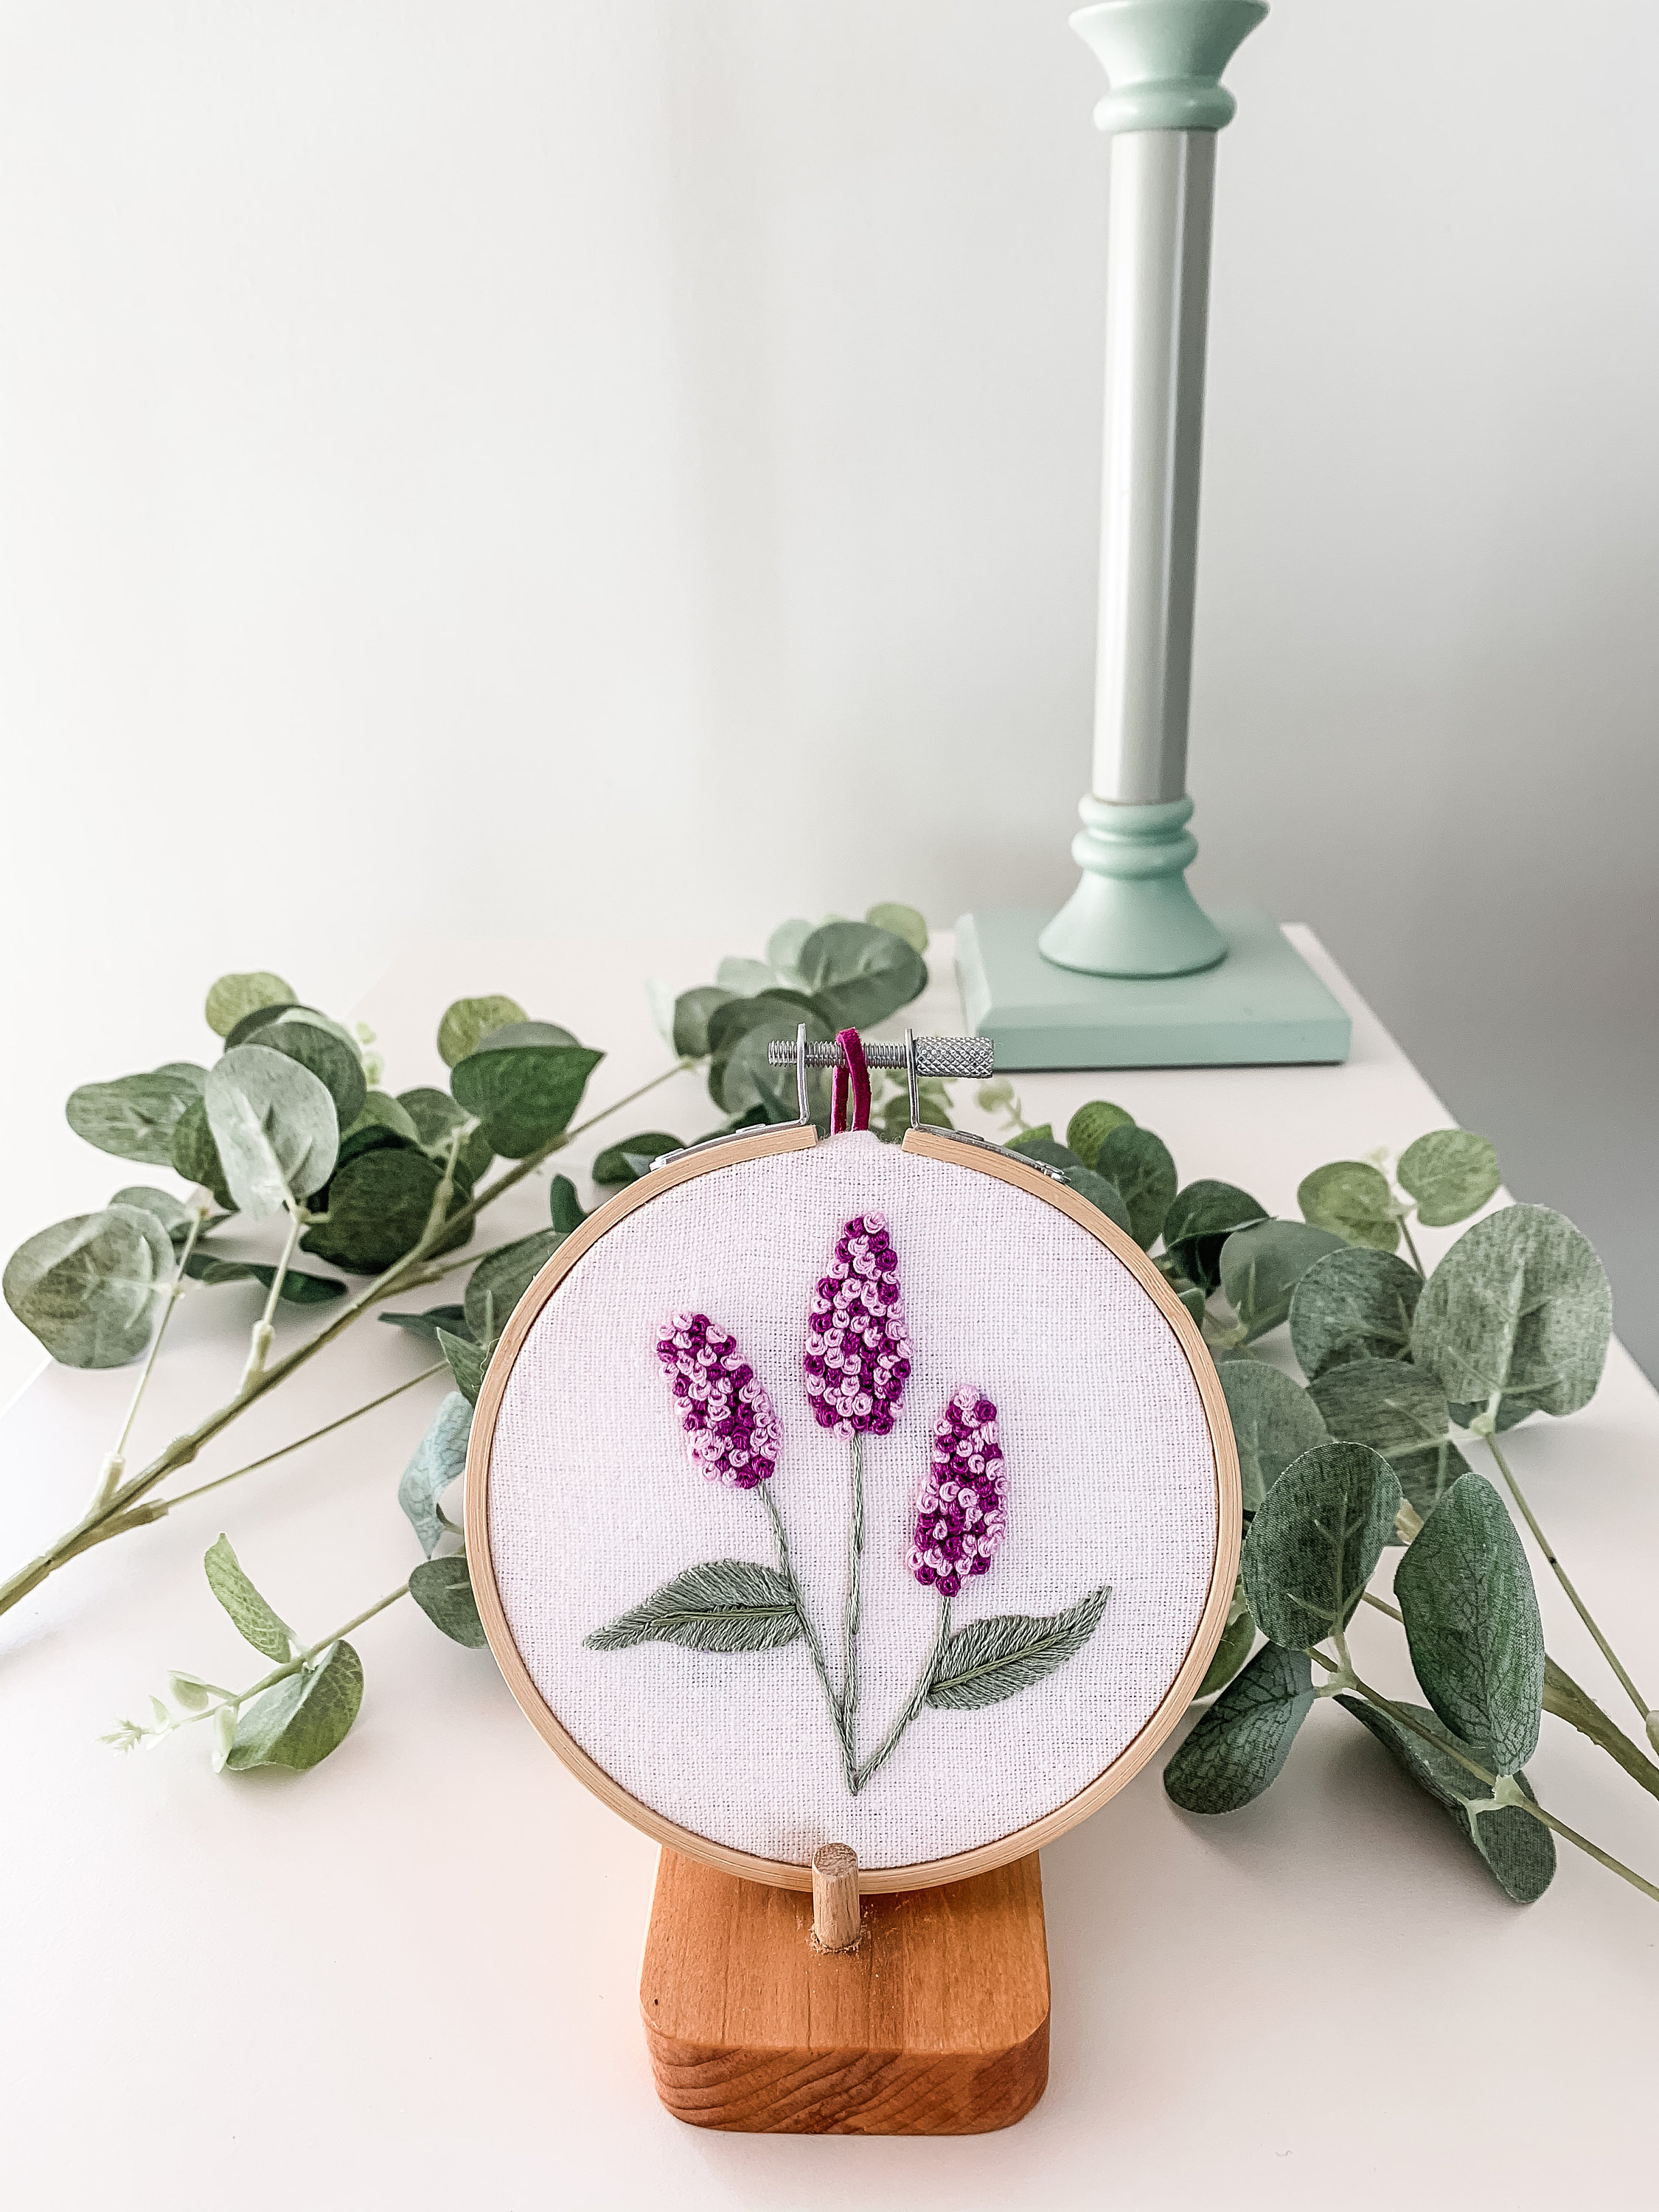 Beginner Hand Embroidery Pattern - Inverness in Lilac & Dusty Rose